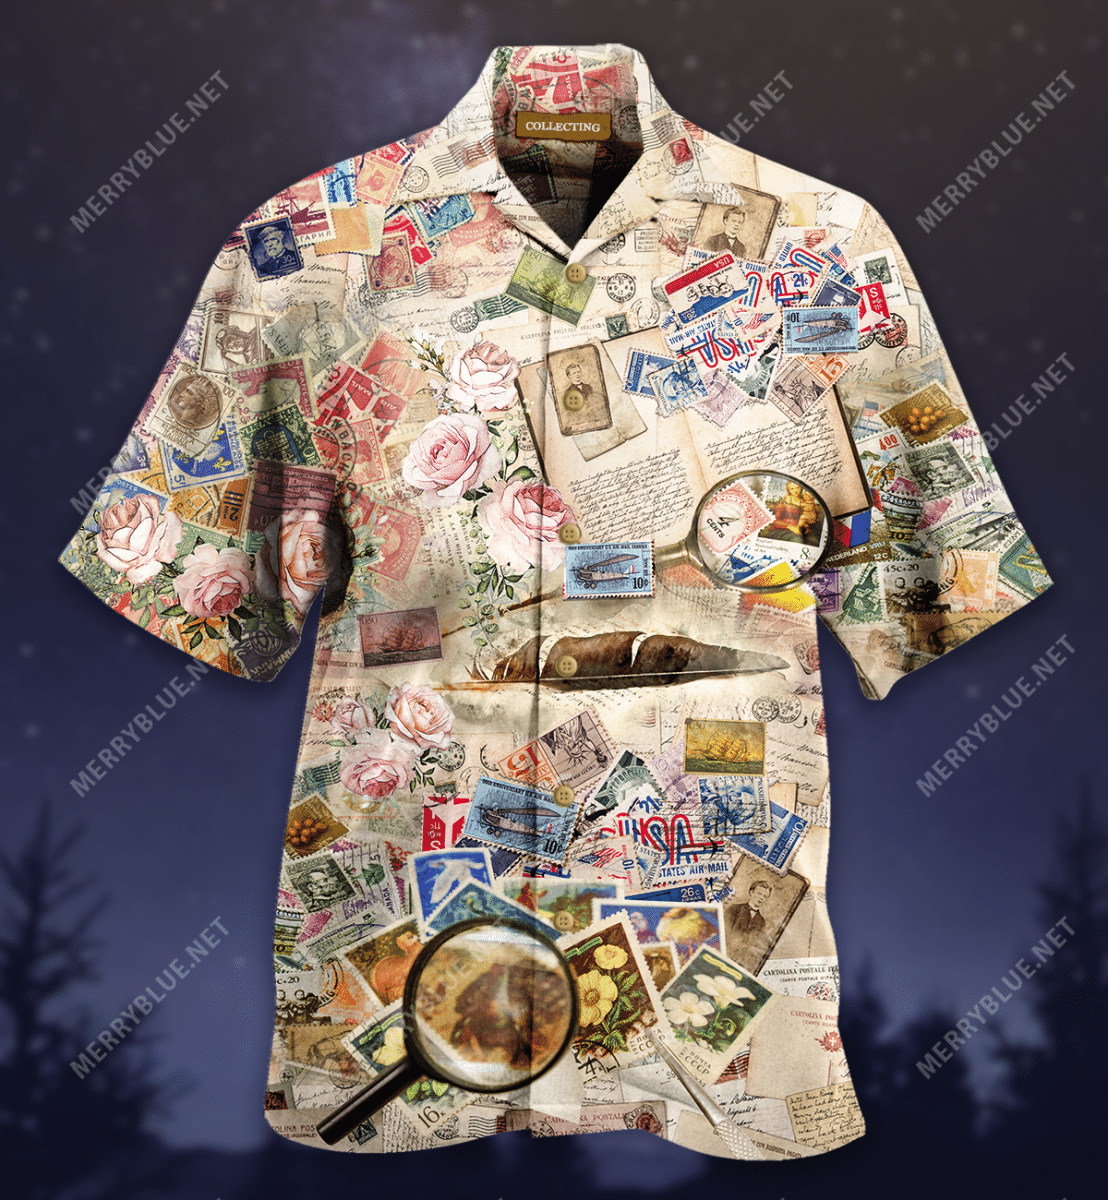 Collecting Stamps Is Favorite Hobby Hawaiian Shirt